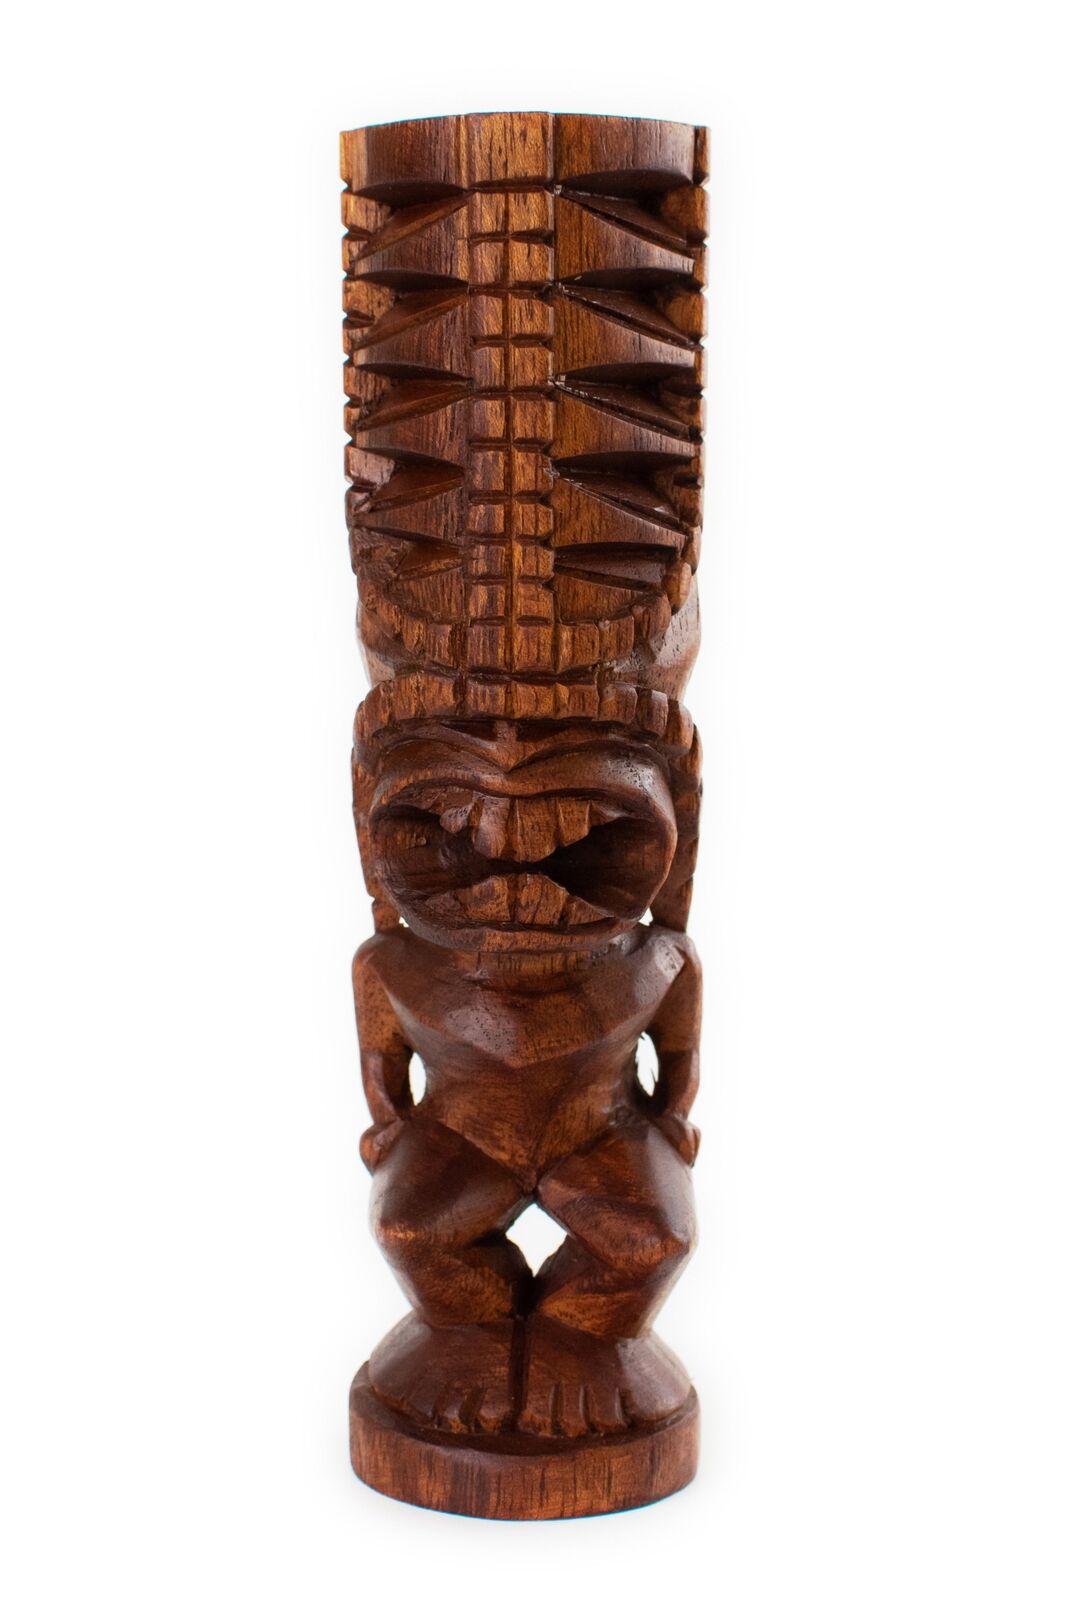 Handmade Wooden Primitive Angry Face Tribal Statue Sculpture Tiki Bar Figurine